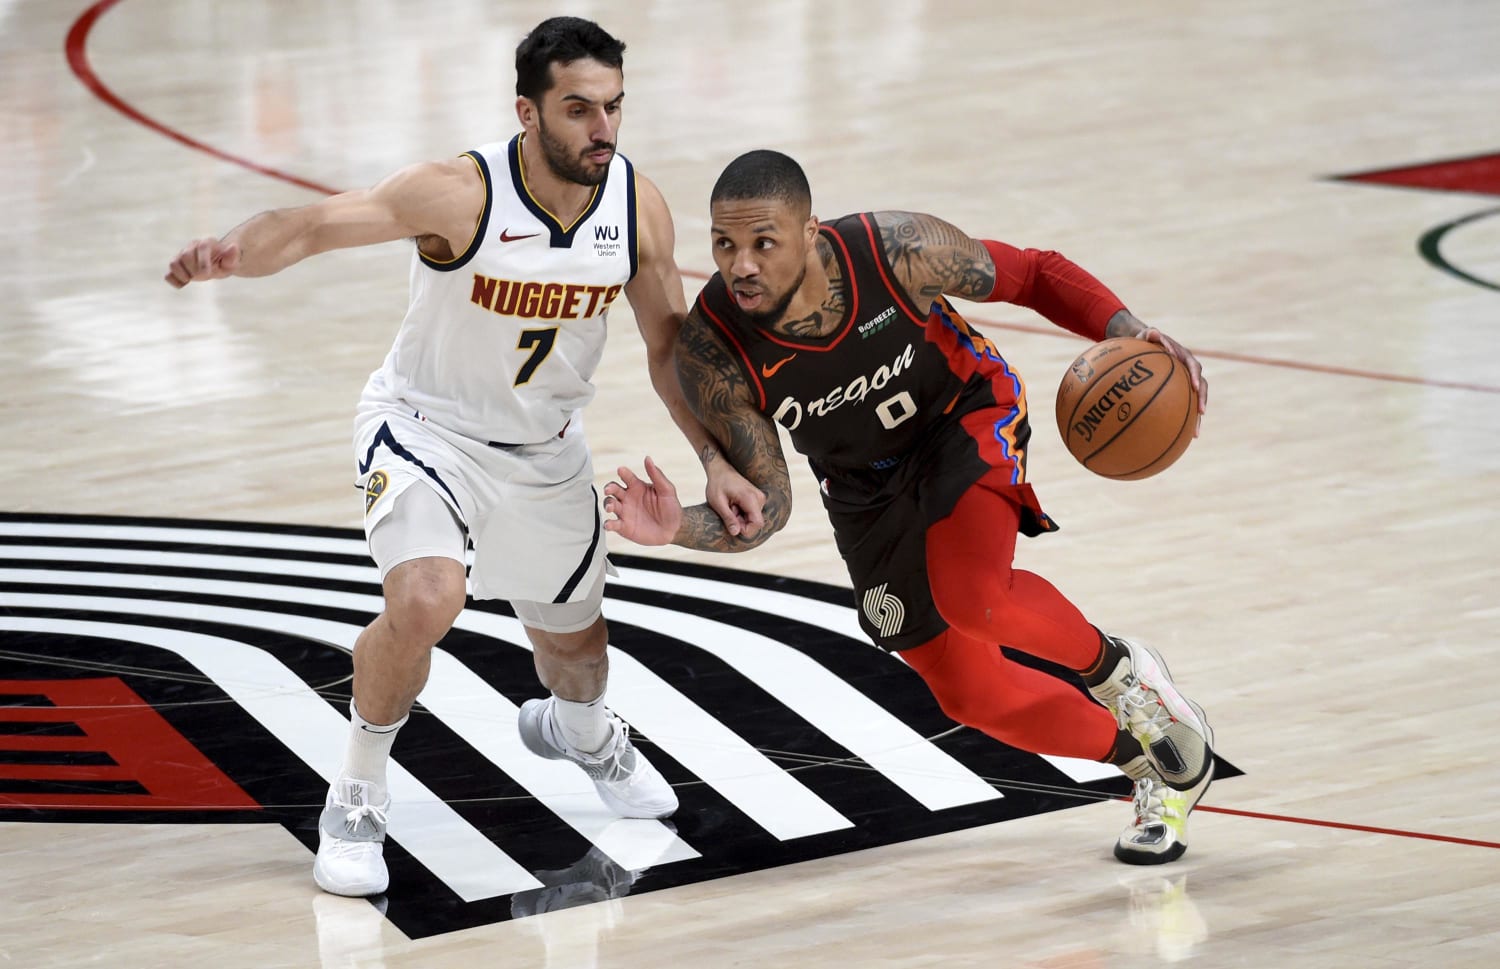 Blazers beat Nuggets 132-116, secure 6th seed for playoffs